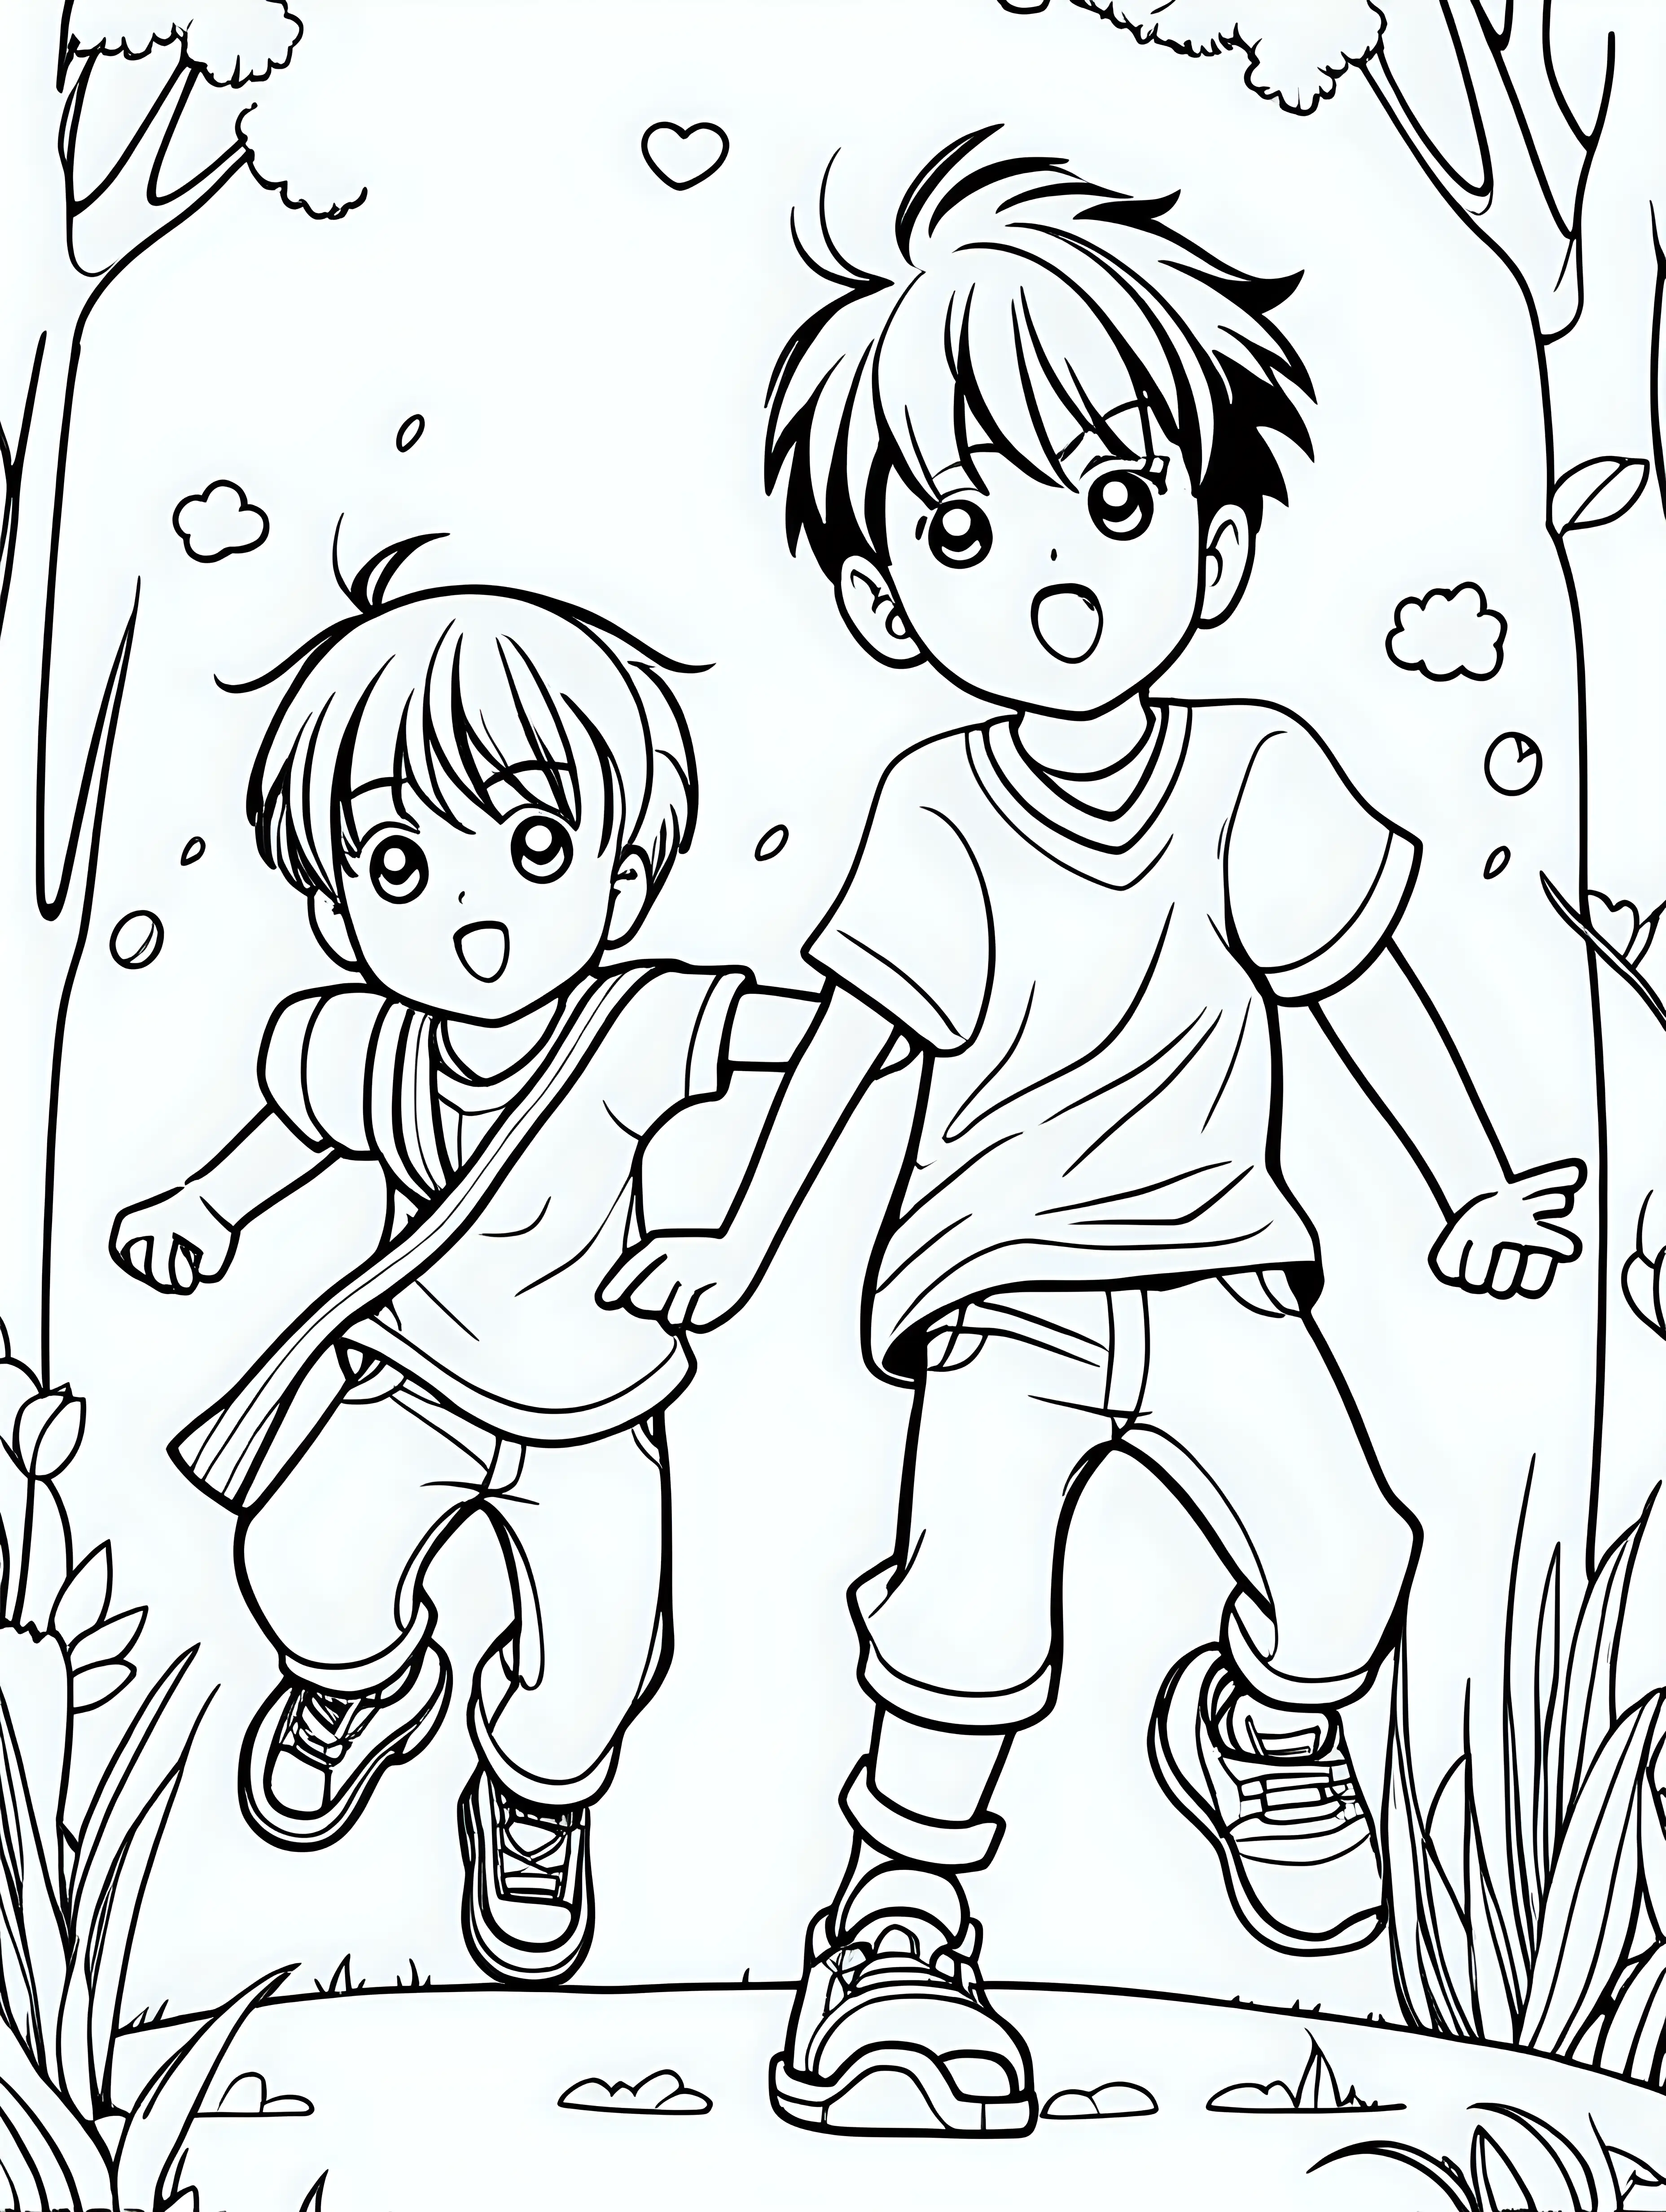 Coloring page for kids, two manga kids playing, black lines and white background 